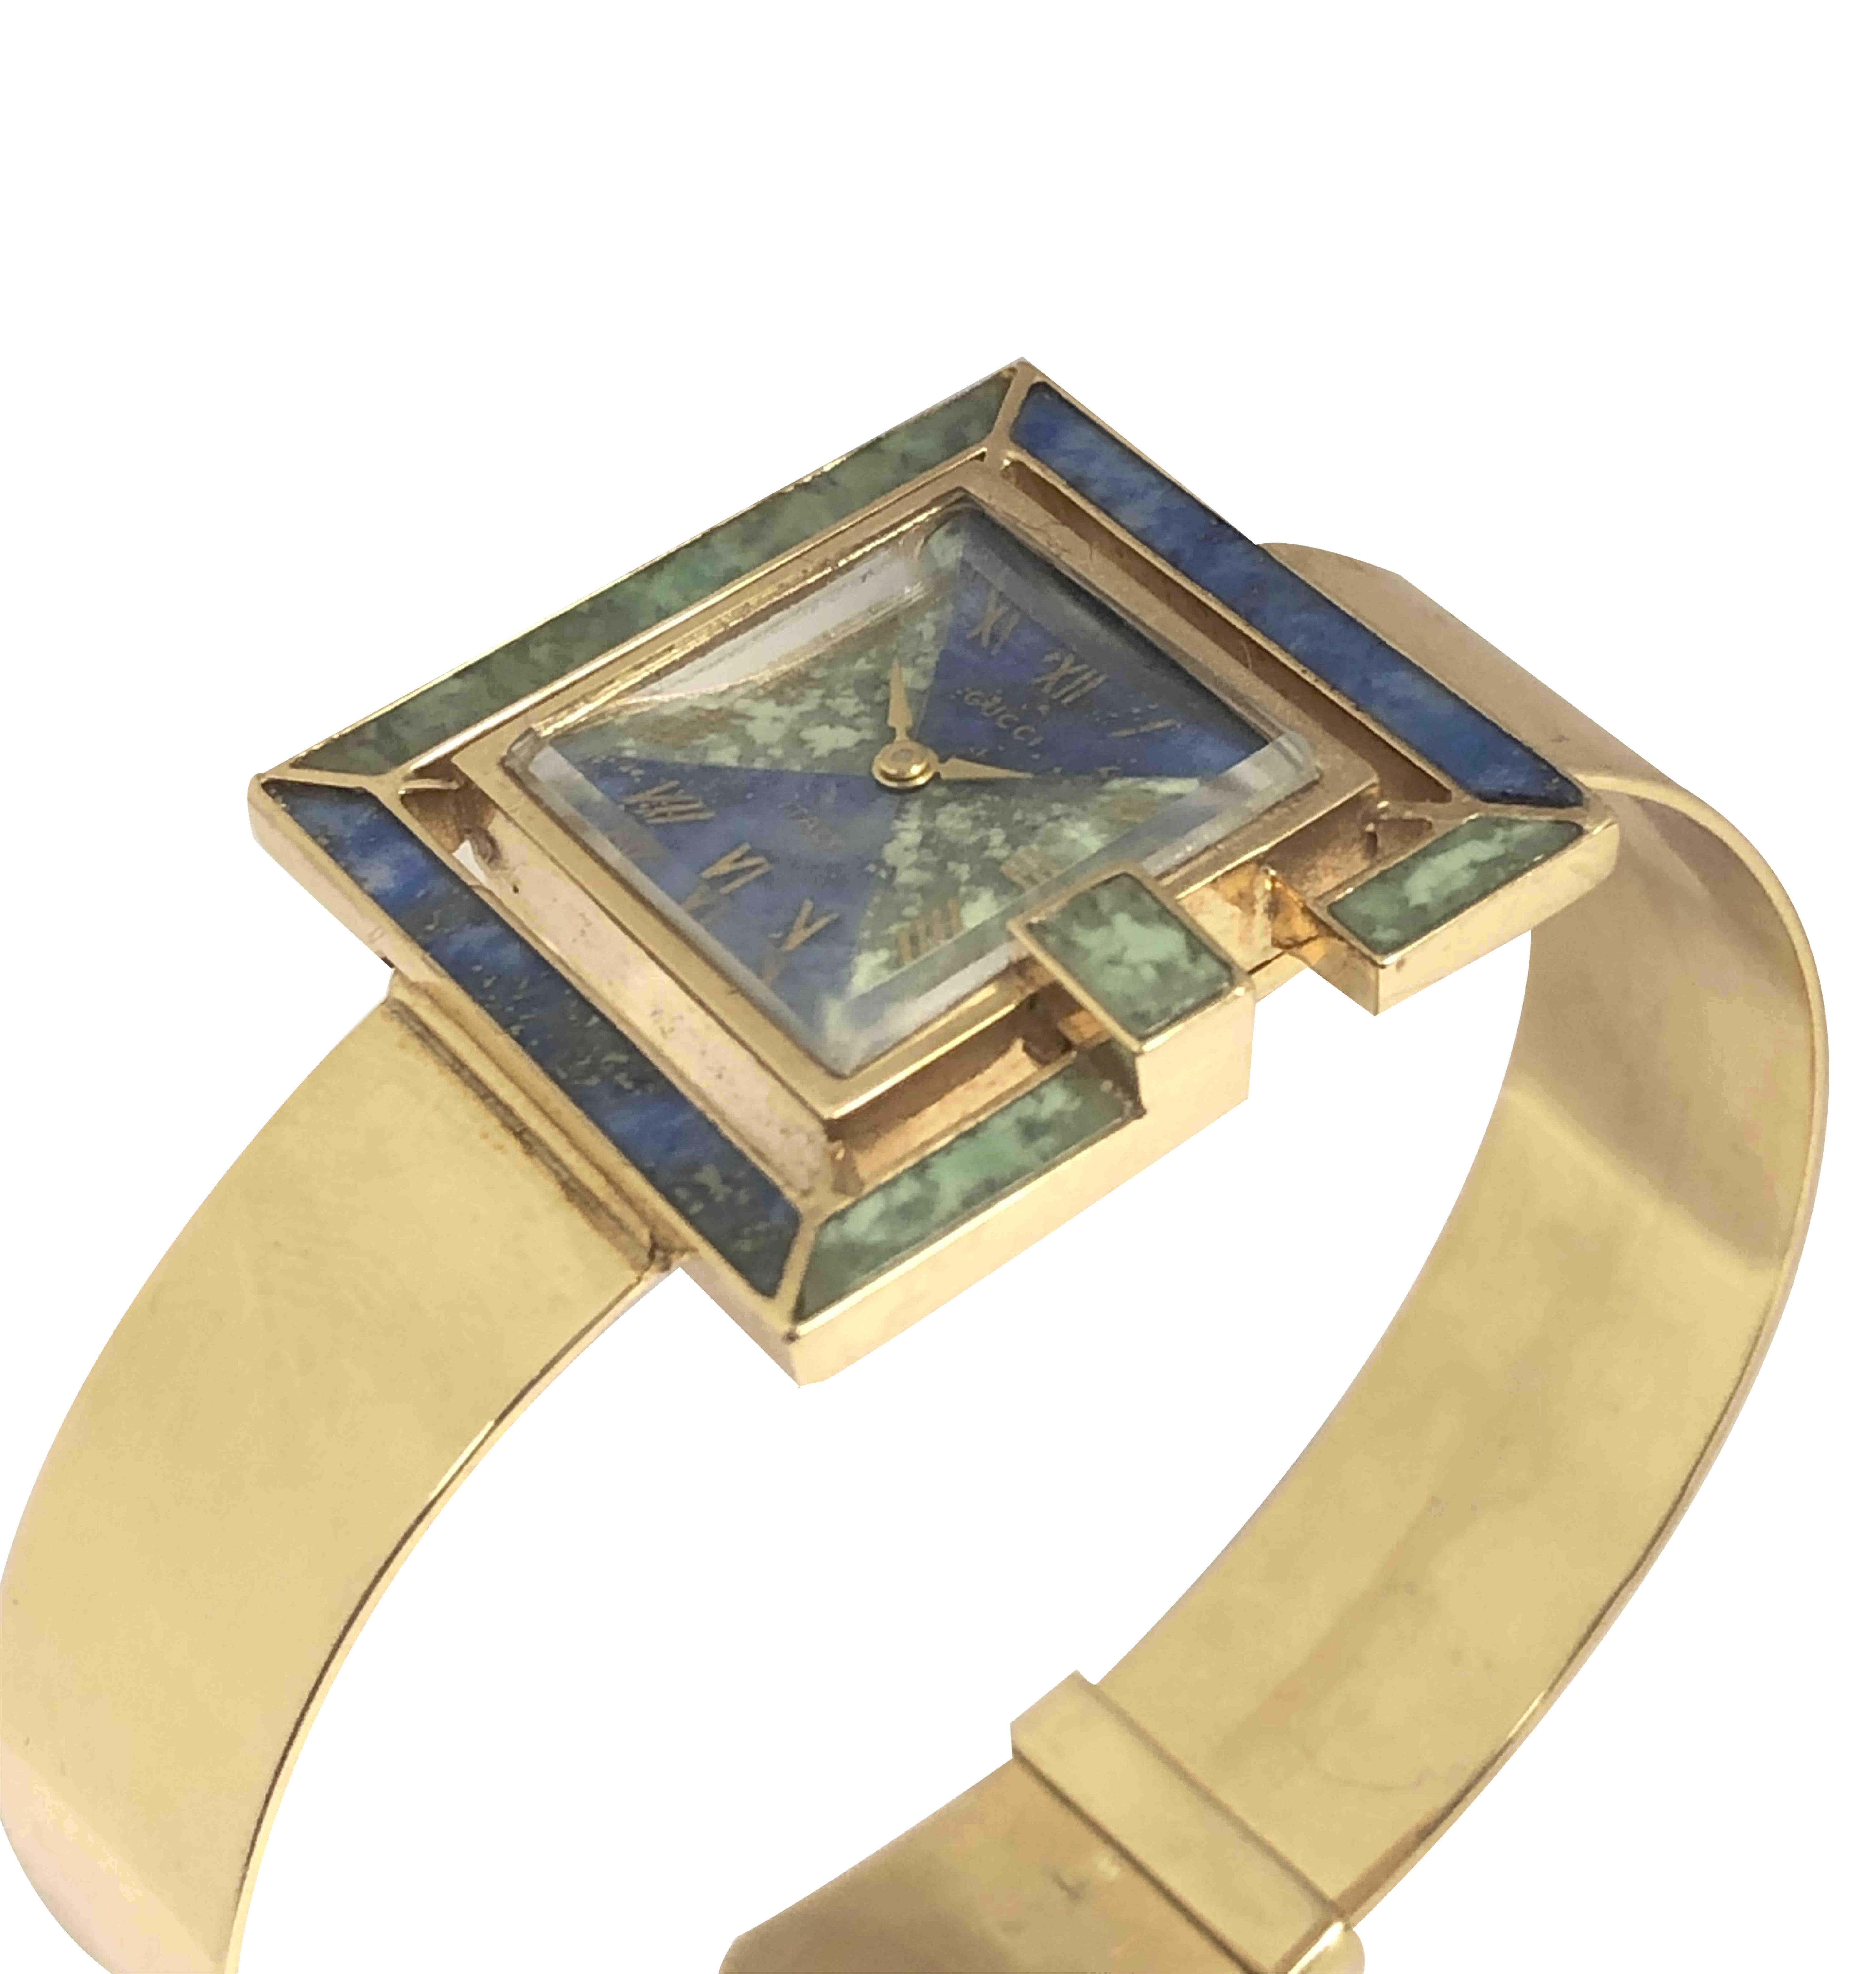 Circa 1960s Gucci 18k Yellow Gold Bracelet Wrist Watch, The watch in the Form of a 